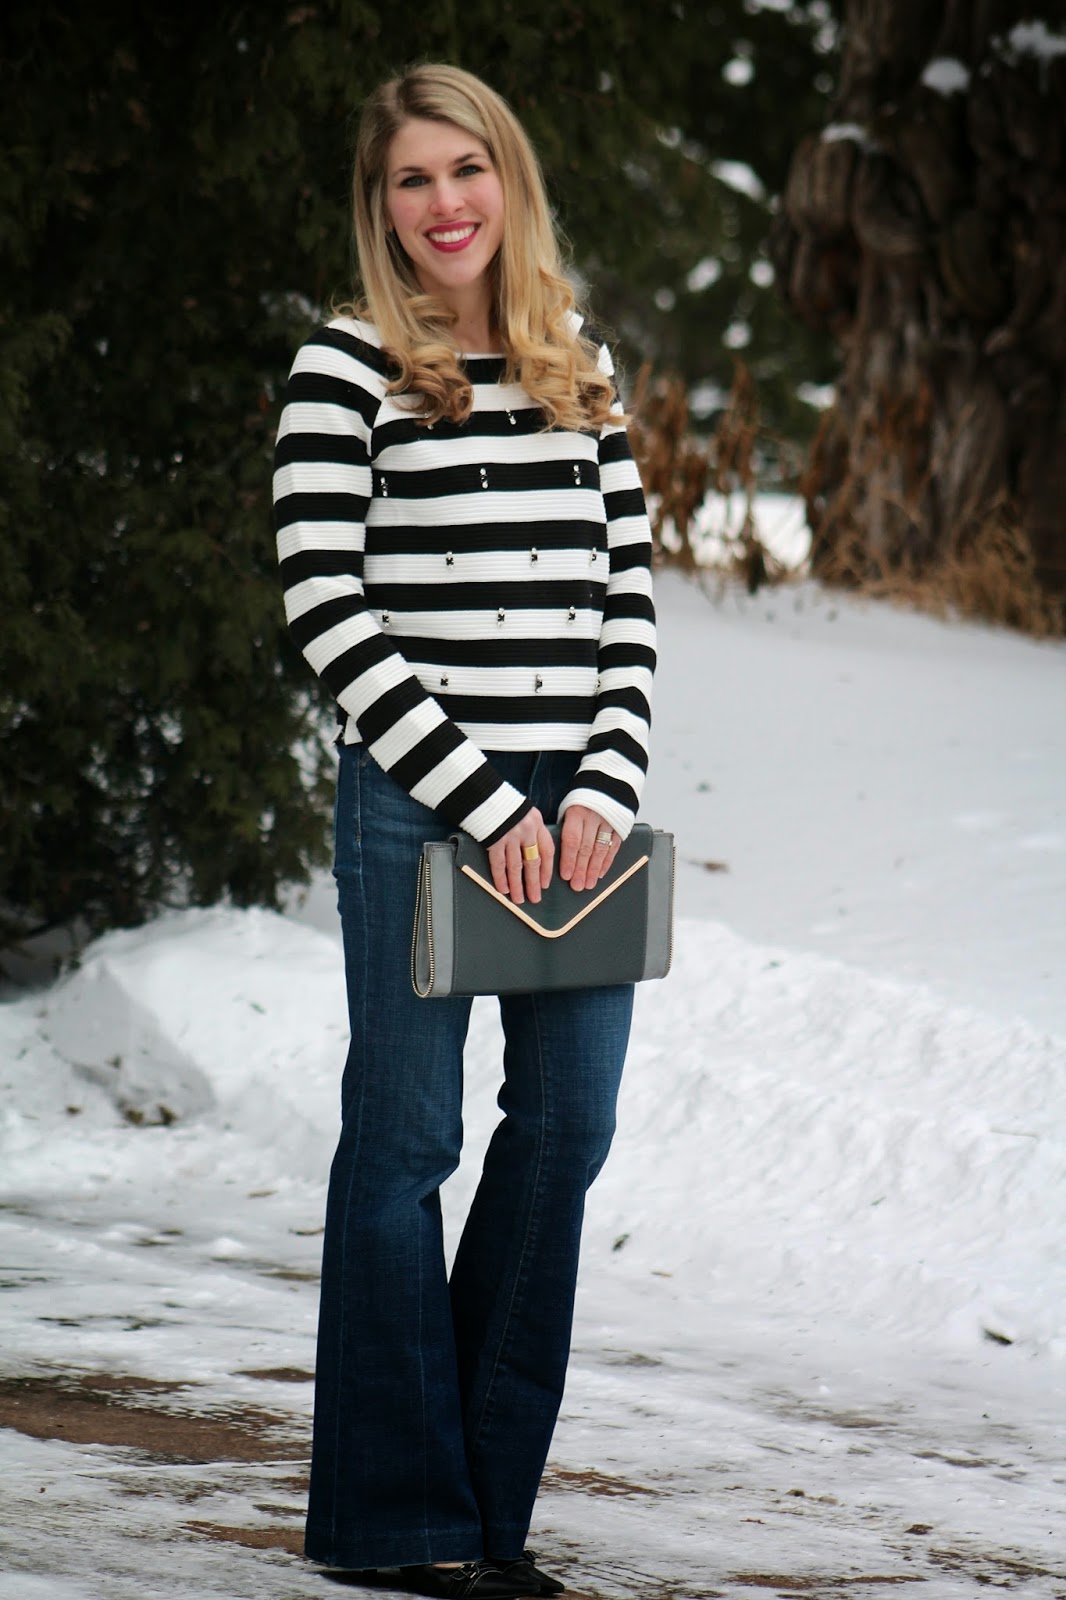 Jeweled Striped Top and Jeans